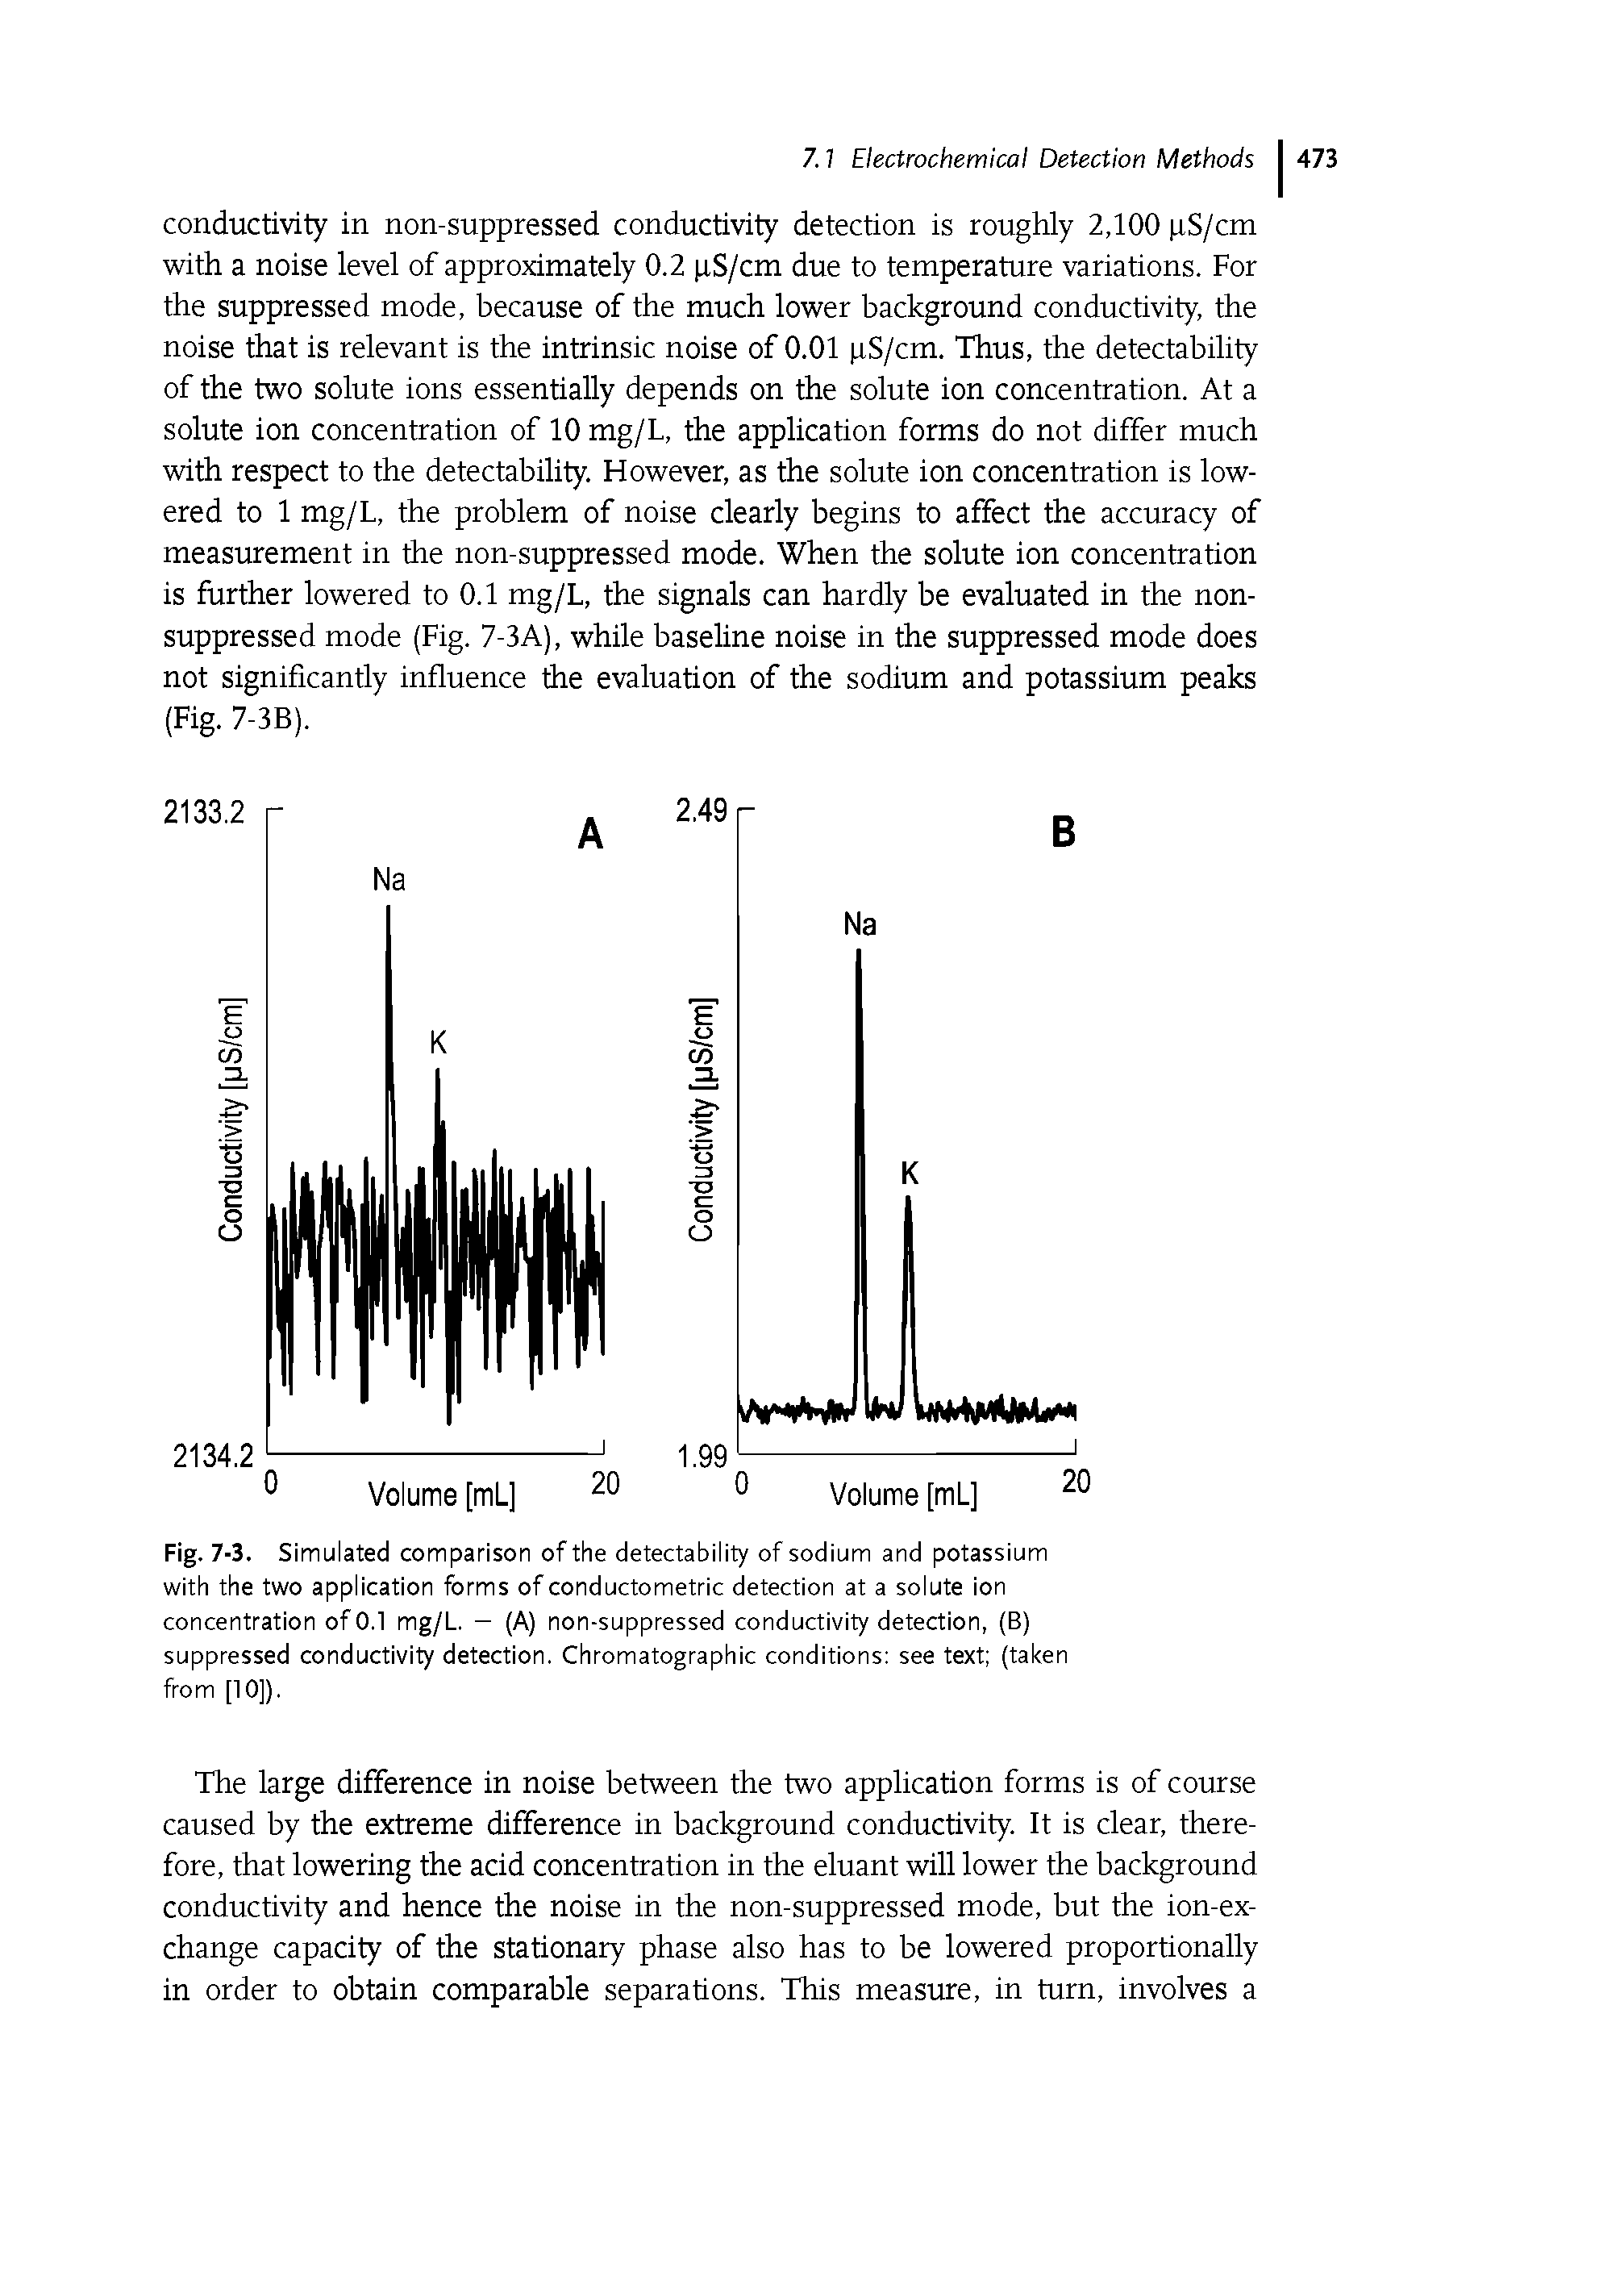 Fig. 7-3. S imulated comparison of the detectability of sodium and potassium with the two application forms of conductometric detection at a solute ion concentration of 0.1 mg/L. - (A) non-suppressed conductivity detection, (B) suppressed conductivity detection. Chromatographic conditions see text (taken from [10]).